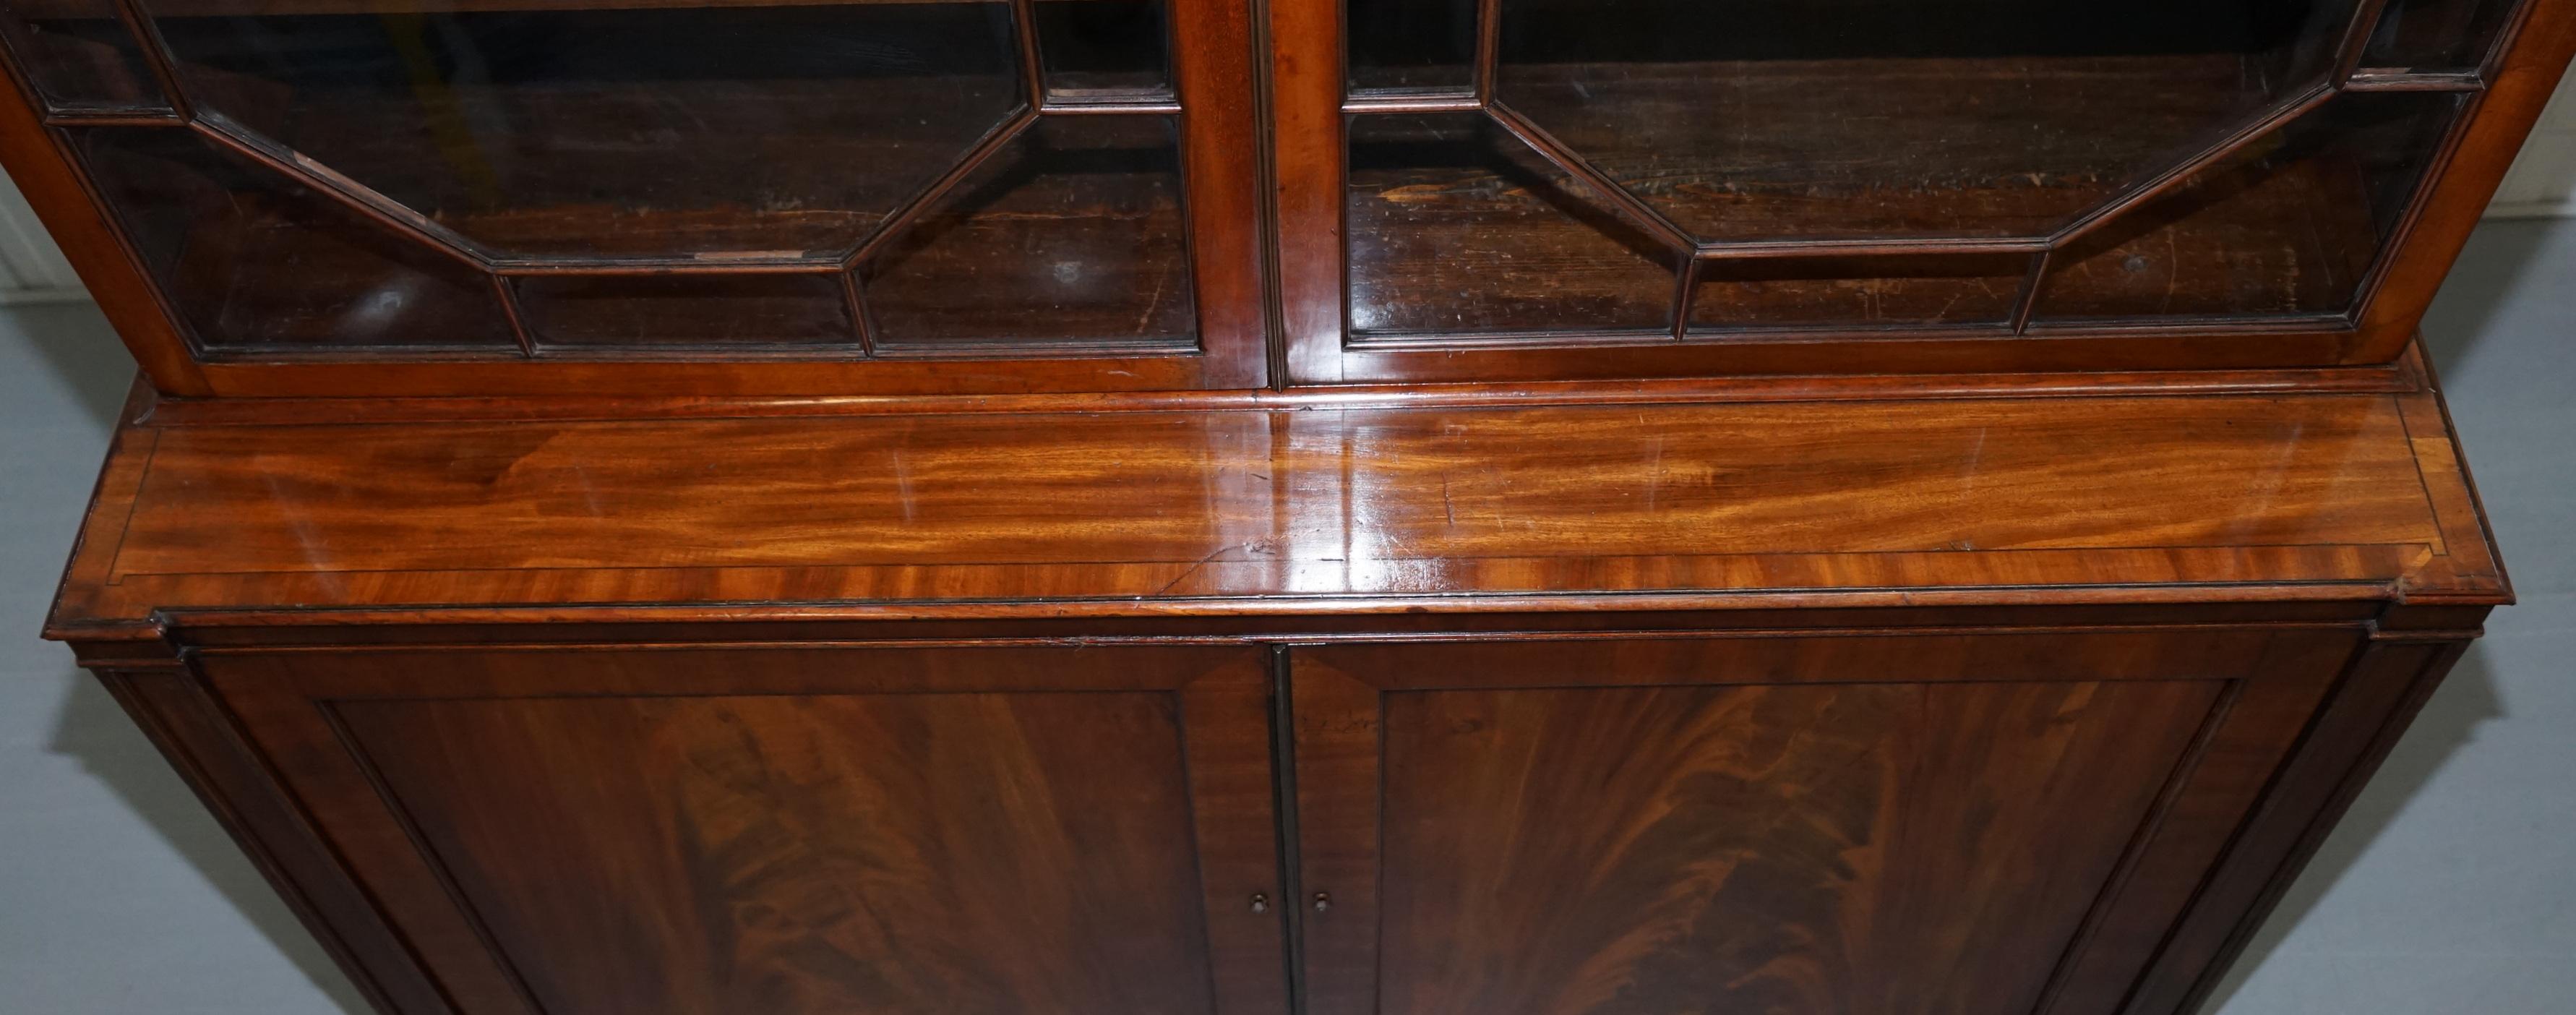 Glass Very Rare Gillows Astral Glazed Mahogany Bookcase Cabinet Original Paper Labels